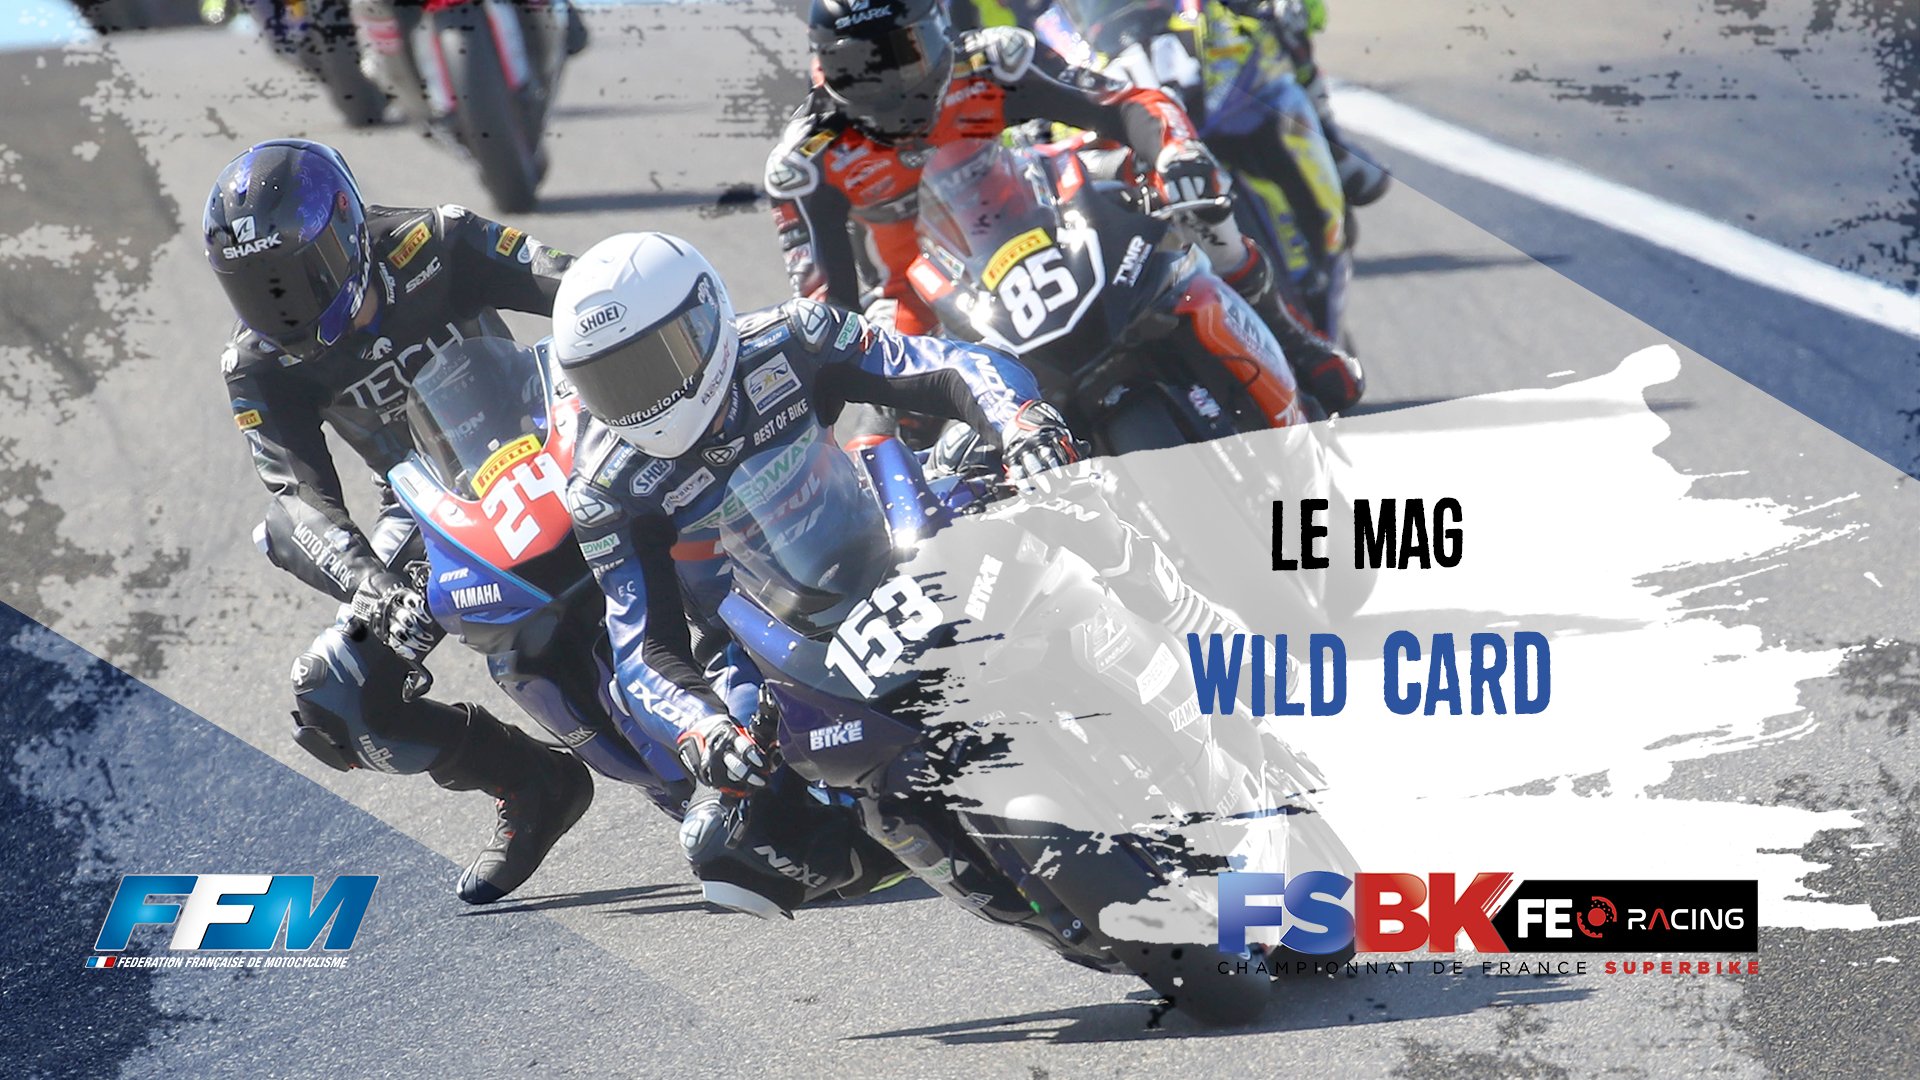 Le Mag – Wildcard